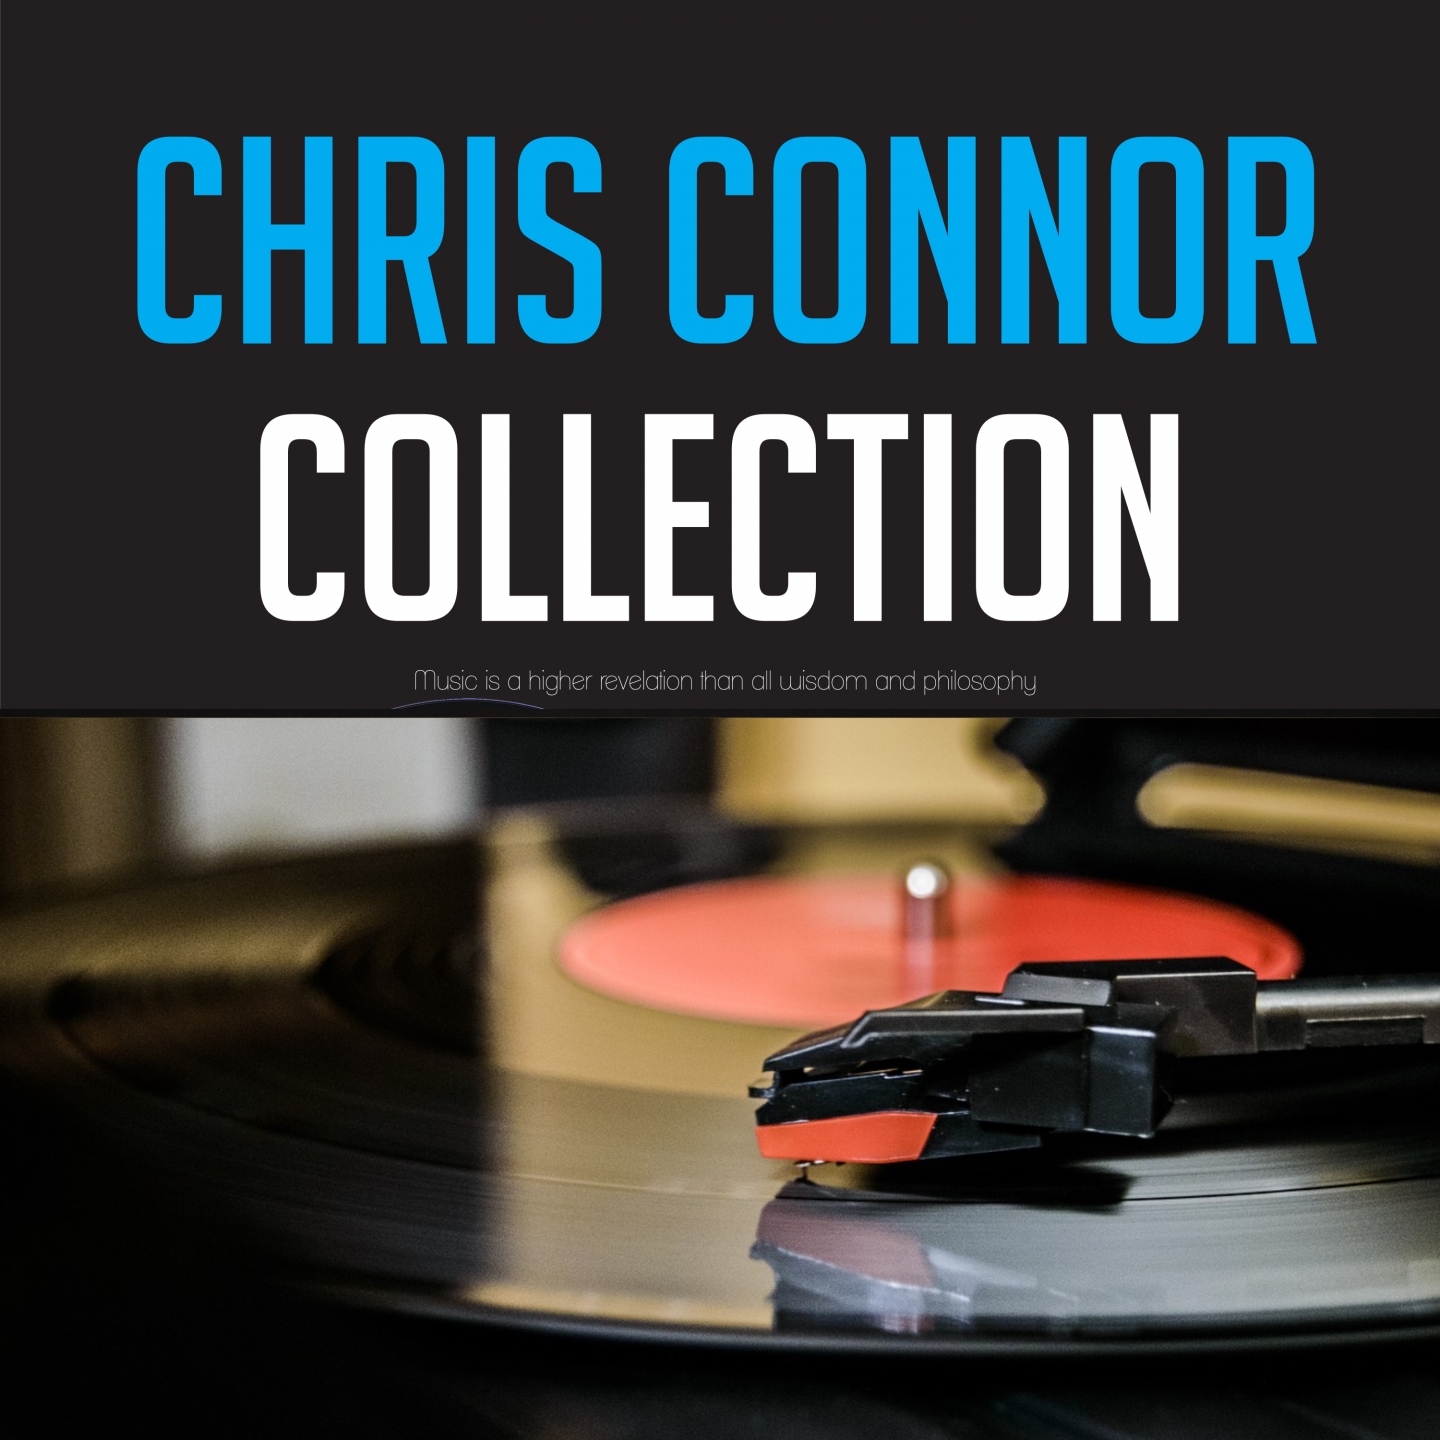 Chris Connor Collection